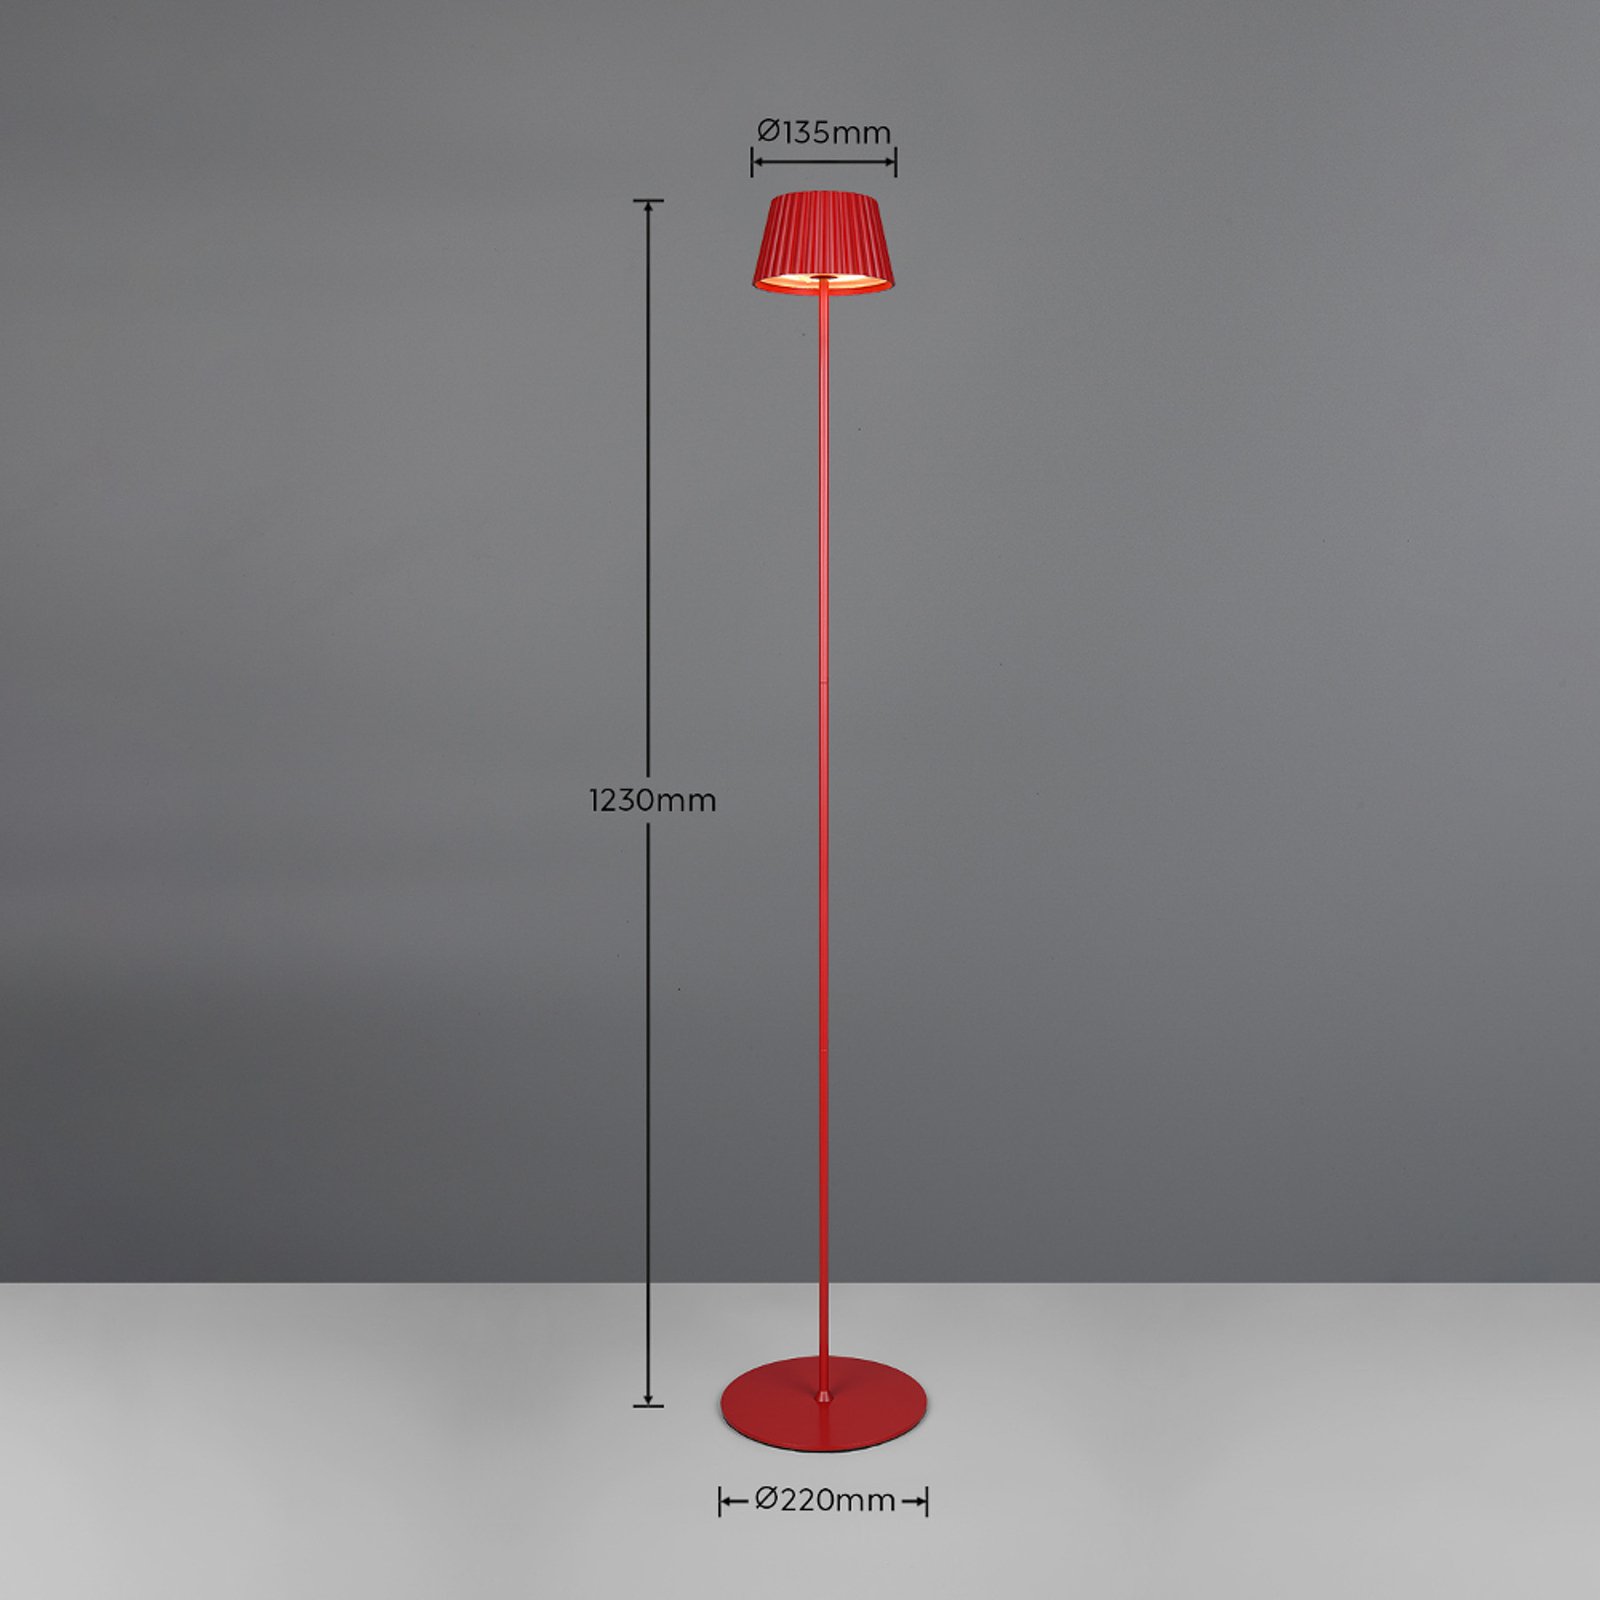 Suarez LED rechargeable floor lamp, red, height 123 cm, metal